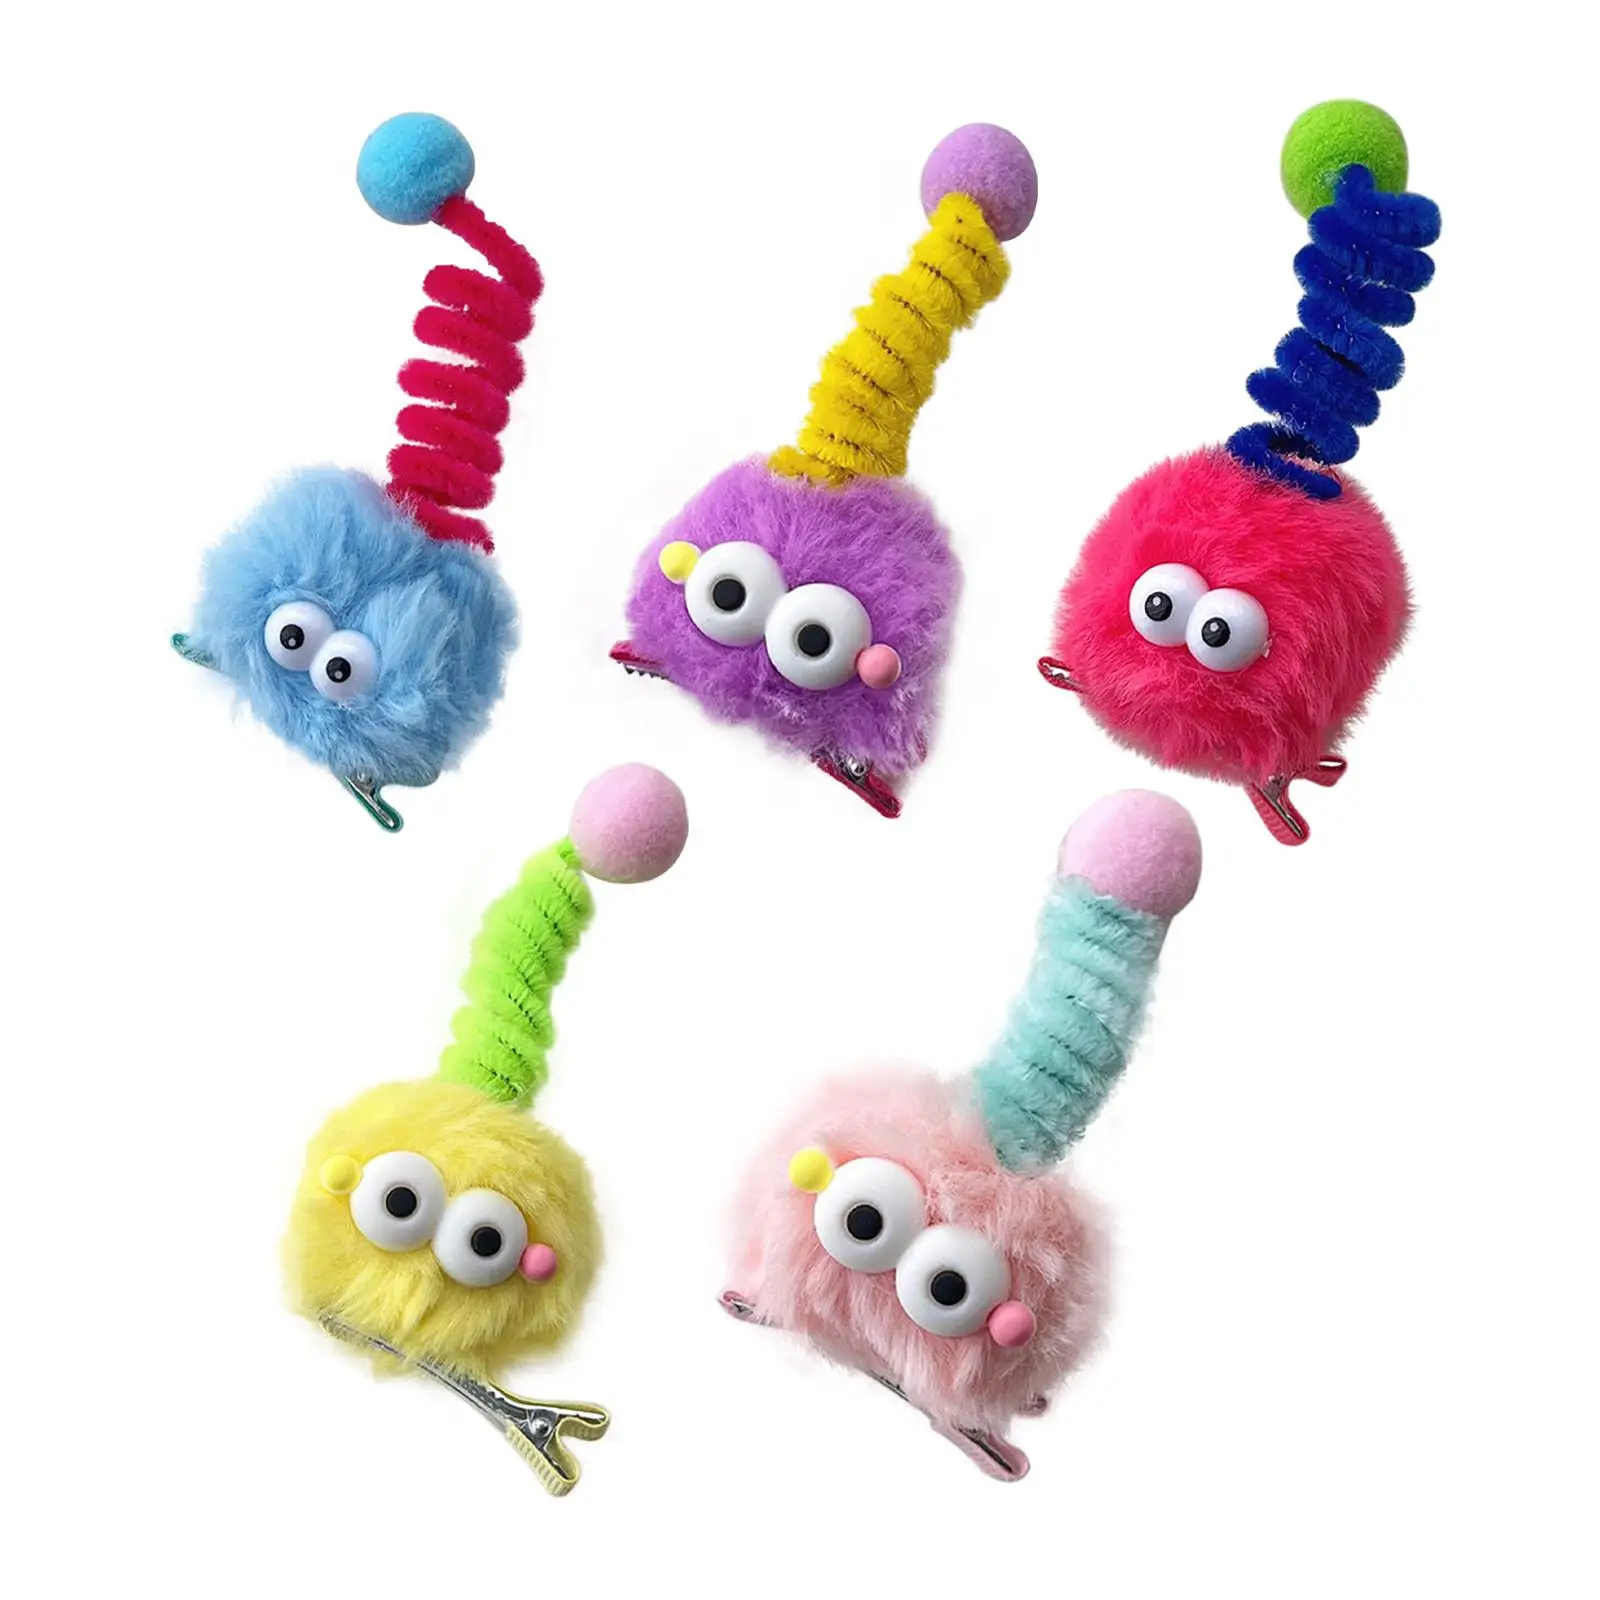 Hair Clips Decoration Cute Novelty Hair Accessories Plush Monster Birthday Gifts Bangs Clip for Kids Girls Children Adults Women